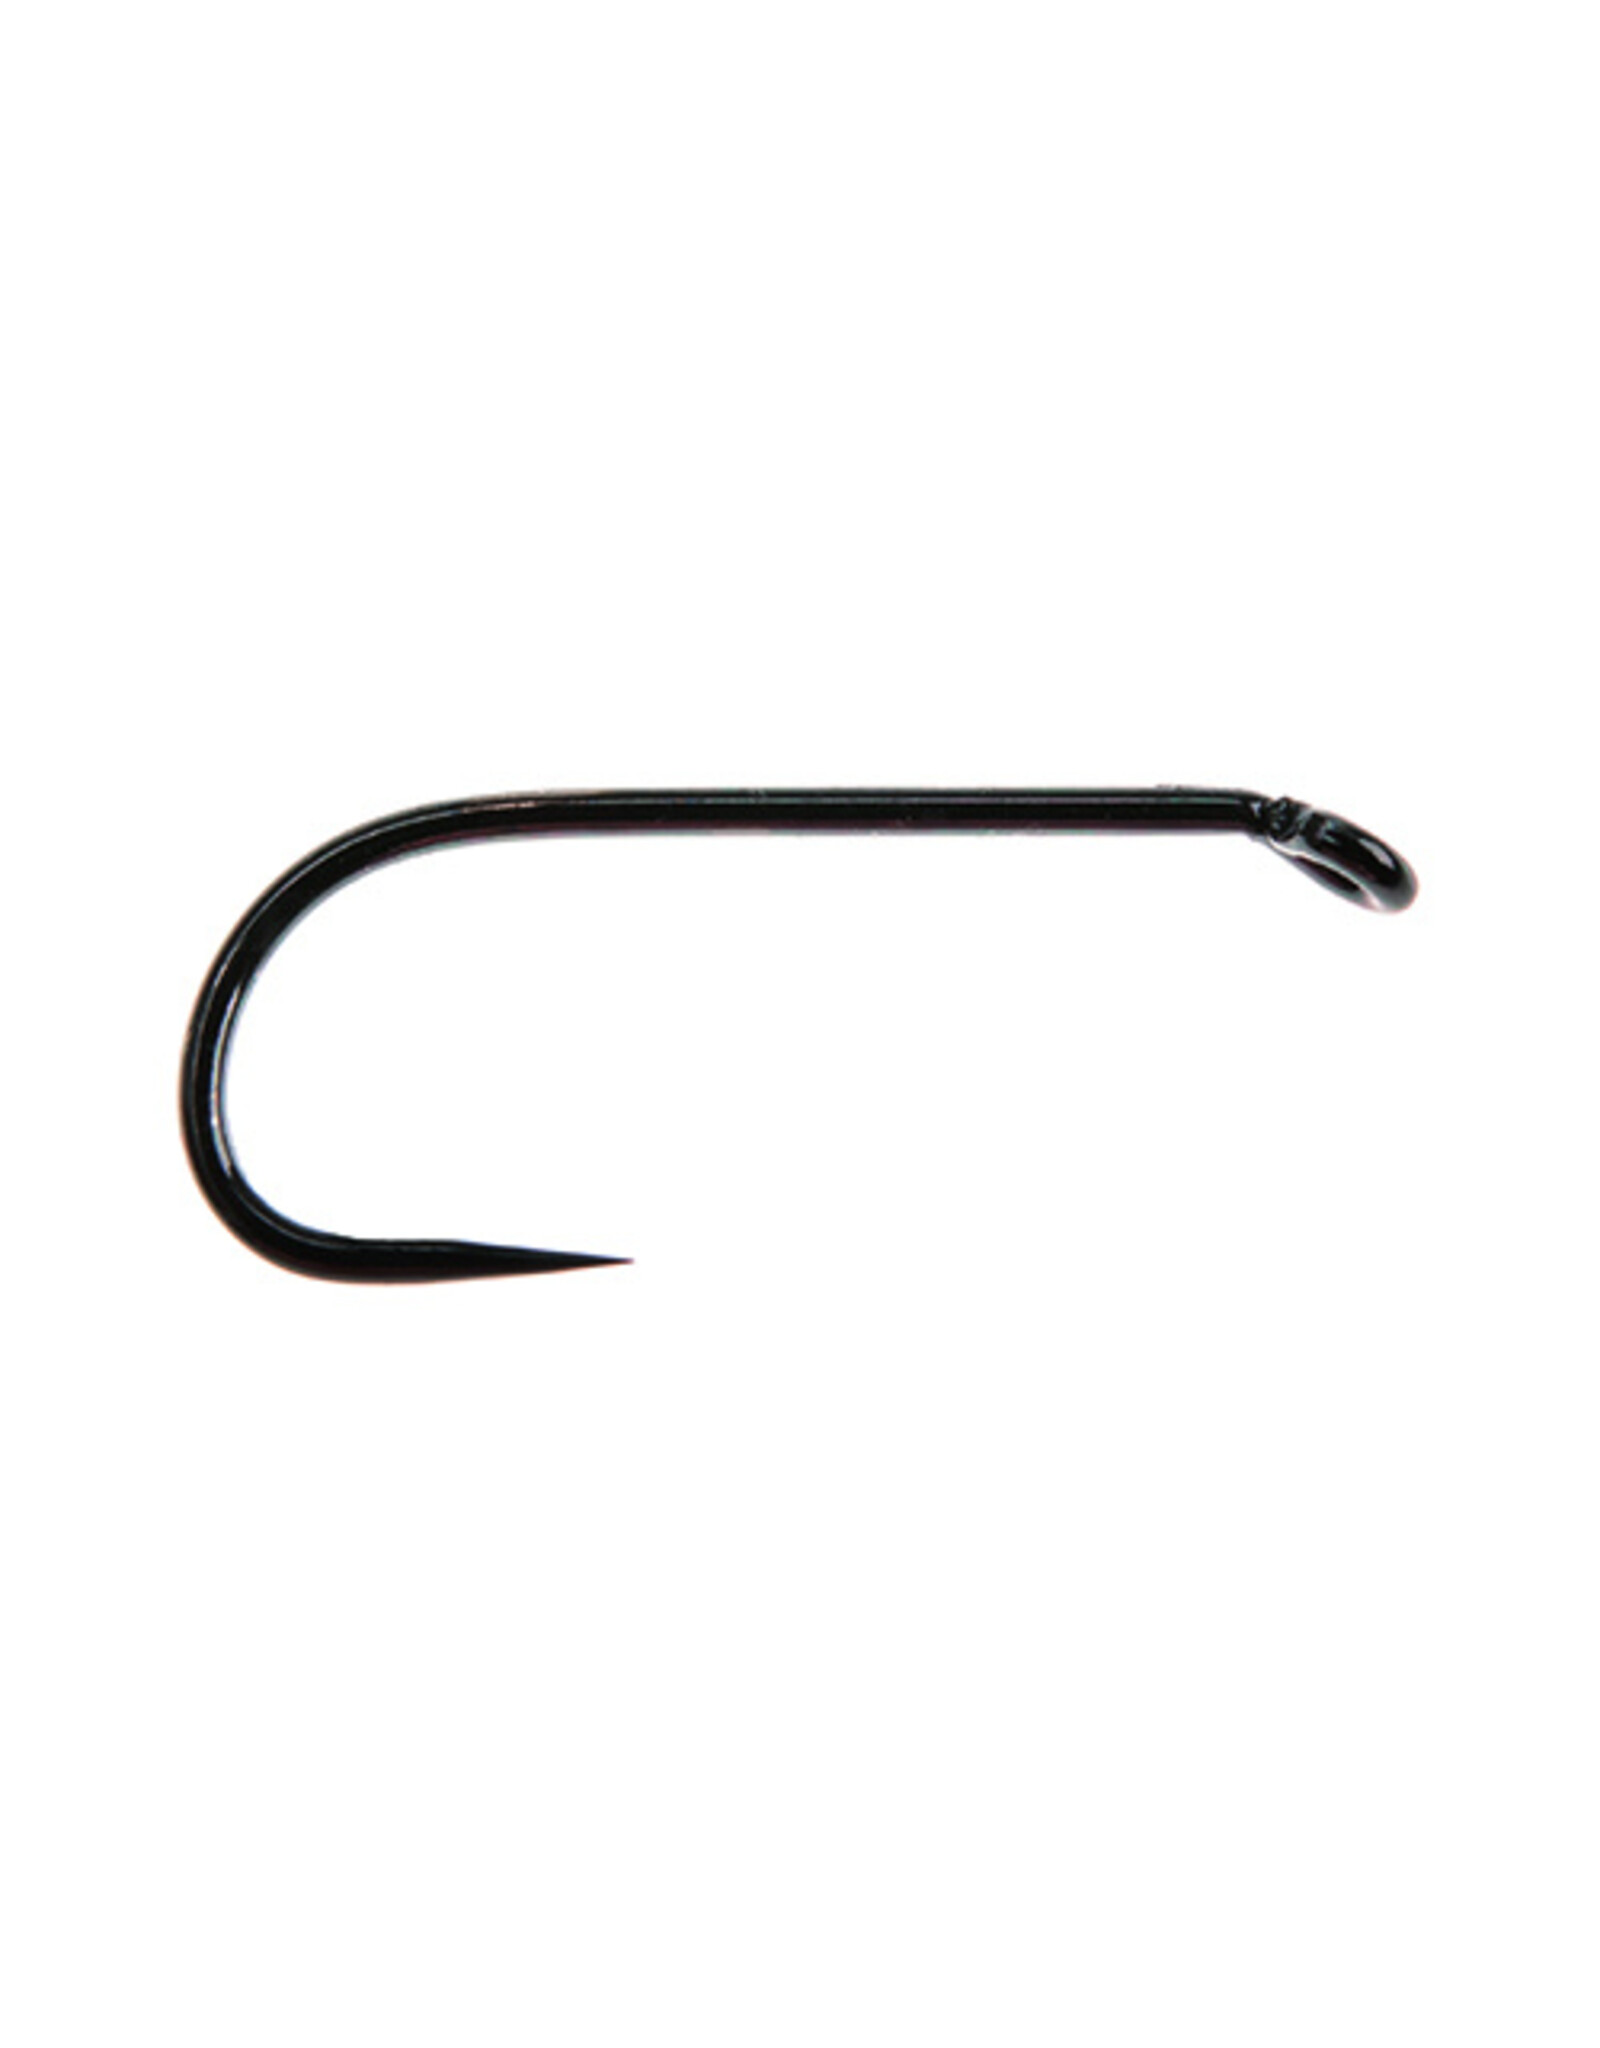 Ahrex Hooks AHREX FW501 Dry Fly Traditional Barbless